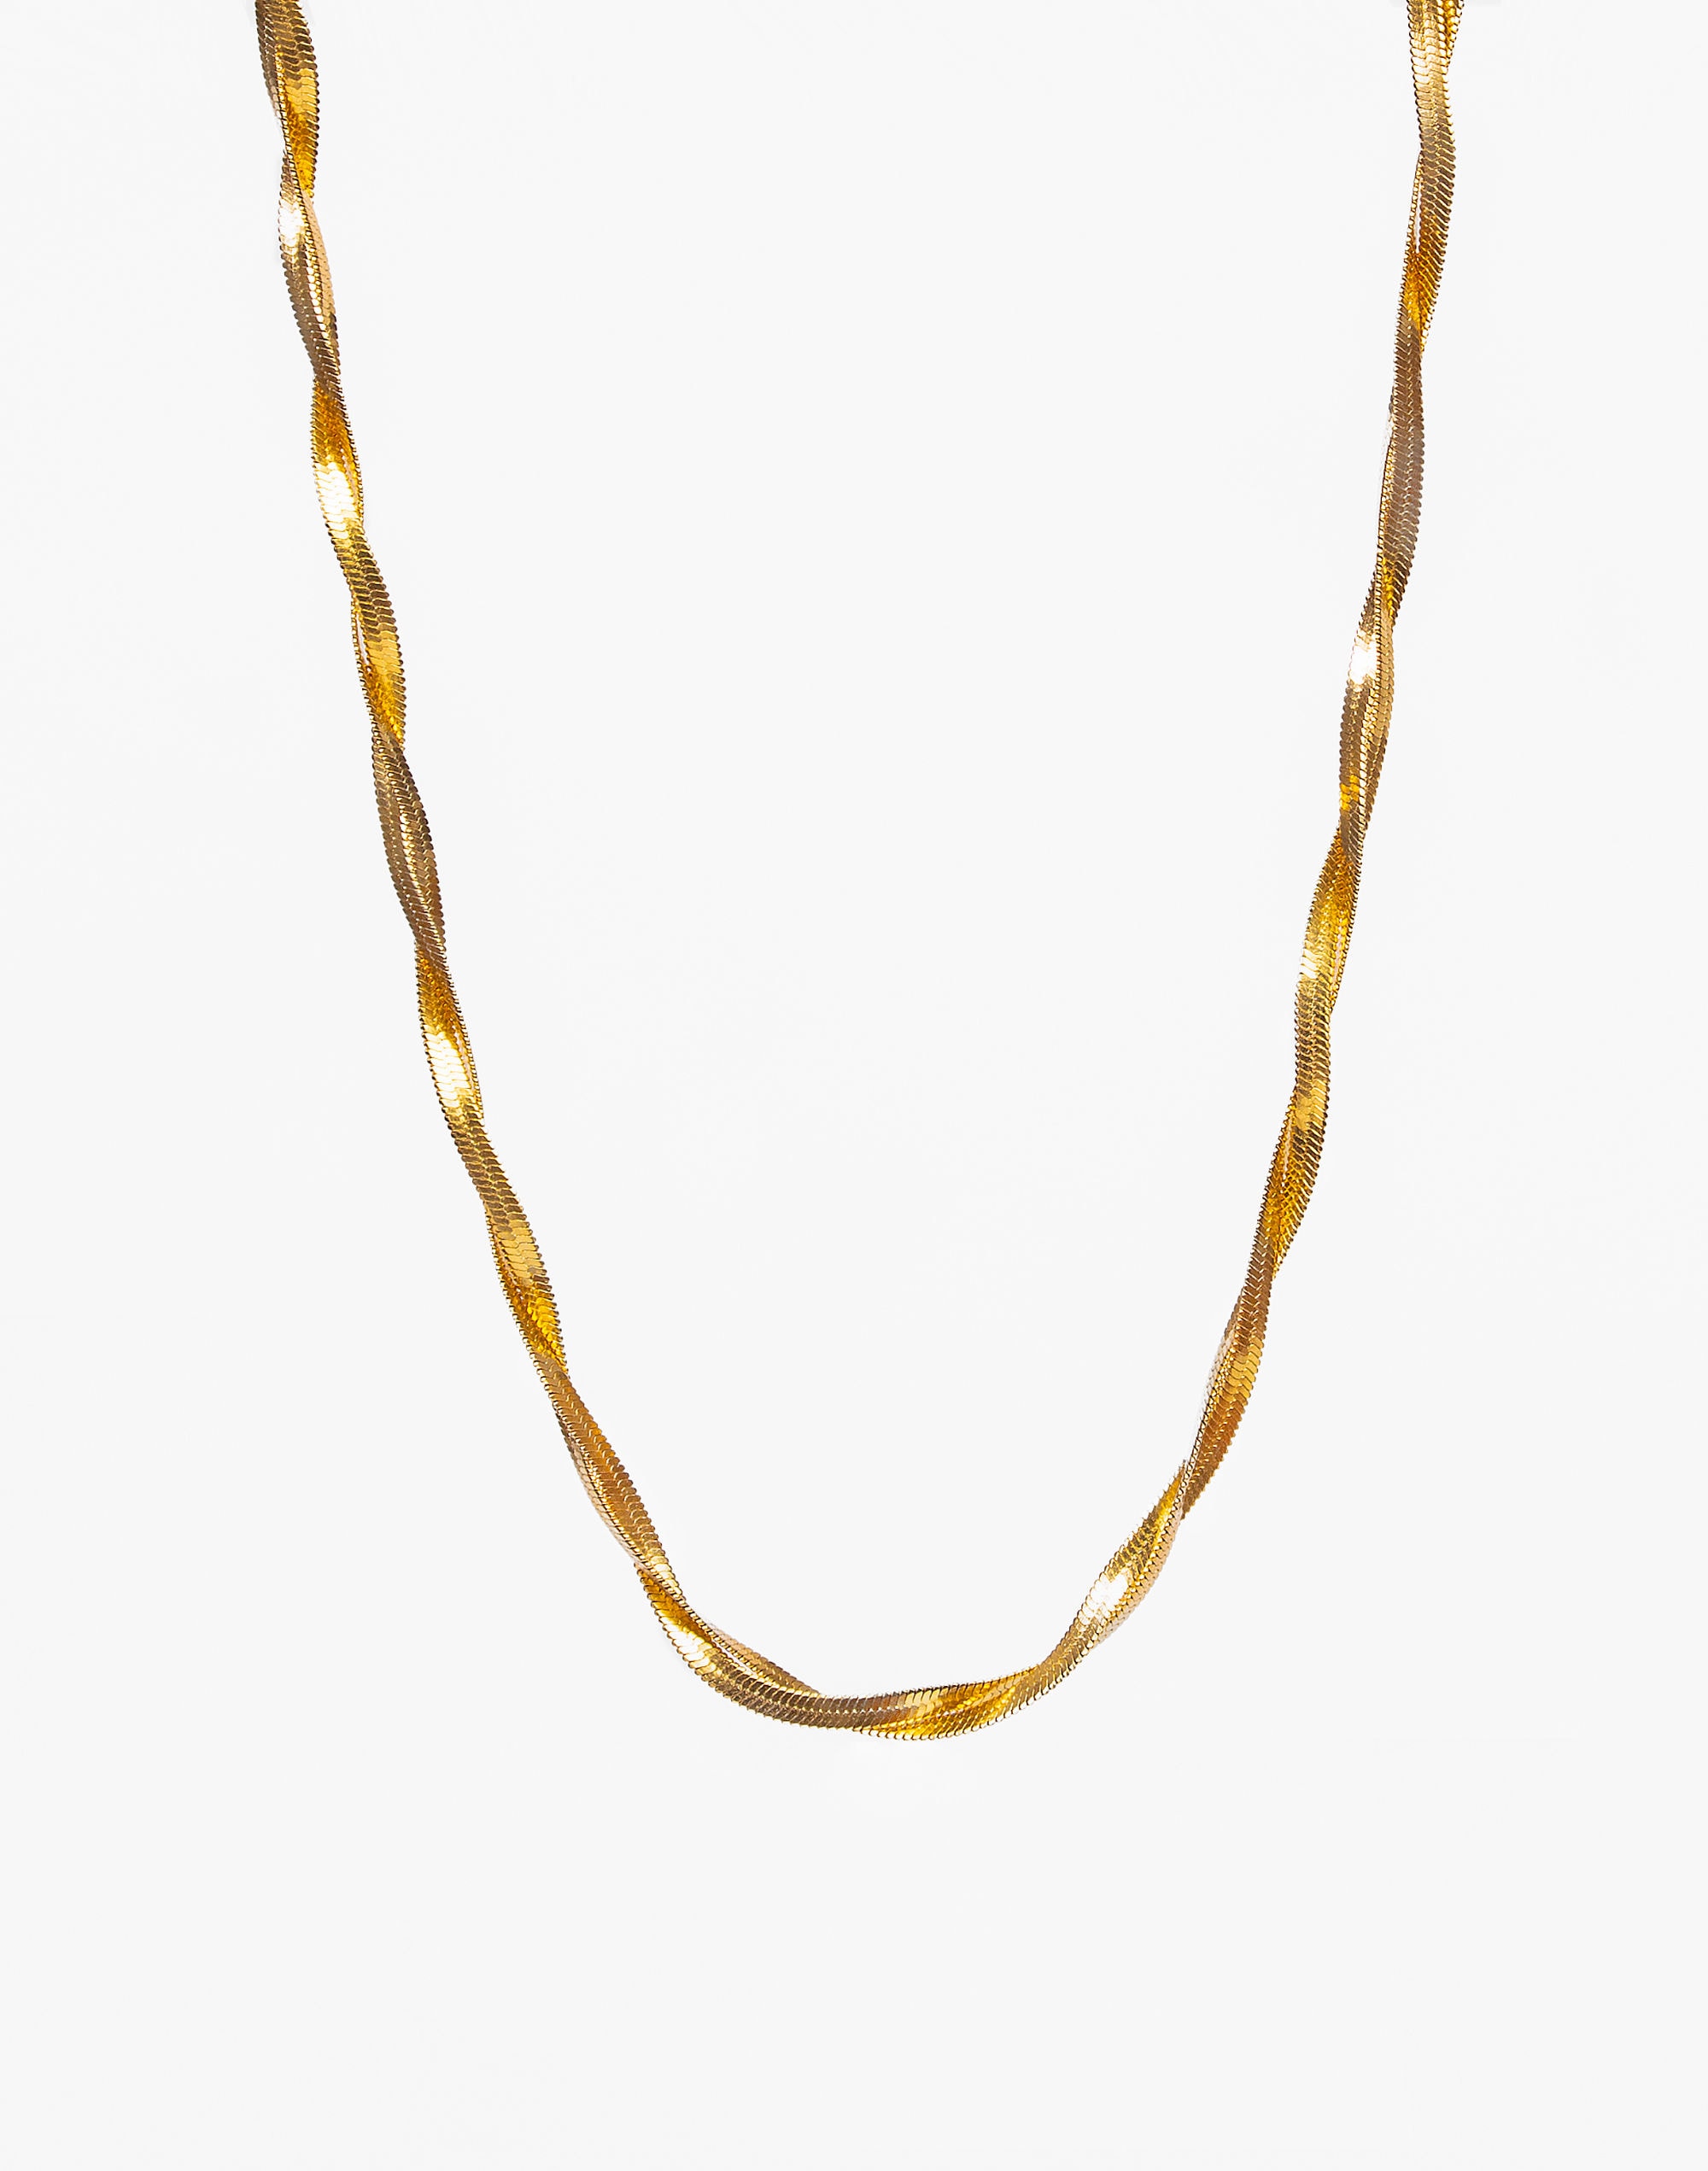 TSEATJEWELRY TWISTED NECKLACE